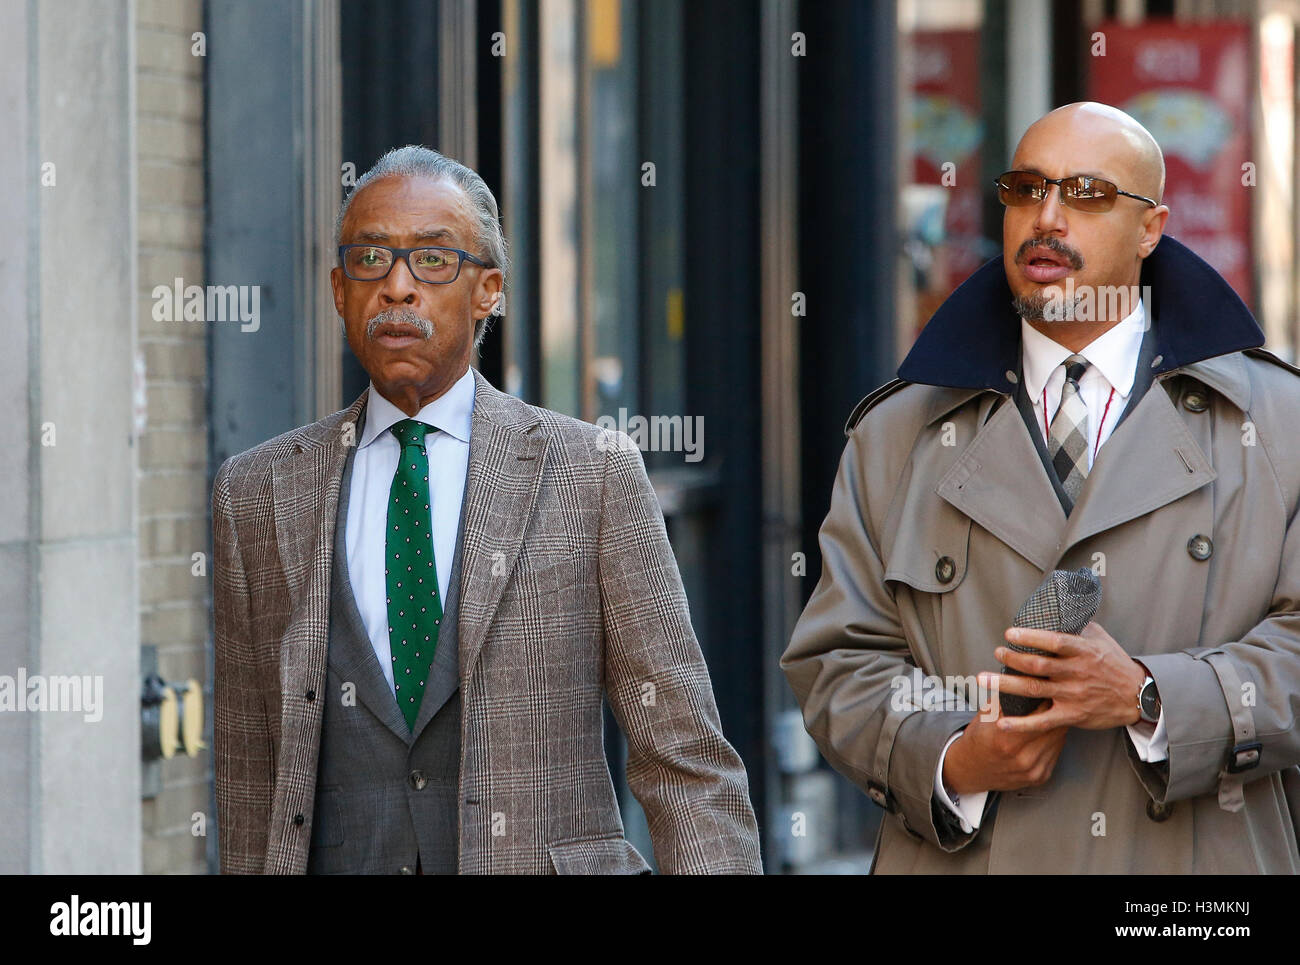 New York City, United States. 10th Oct, 2016. NAN director Rev Al Sharpton (rt) arrives at presser with Rev Kirstin Jon Foy. Rev Al Sharpton gathered with members of the NYC City Council in Midtown Manhattan to announce support for Haitians displaced by Hurricane Matthew, & to eulogize late Kings County district attorney Ken Thompson who passed away unexpectedly from cancer the day before. Credit:  Andy Katz/Pacific Press/Alamy Live News Stock Photo